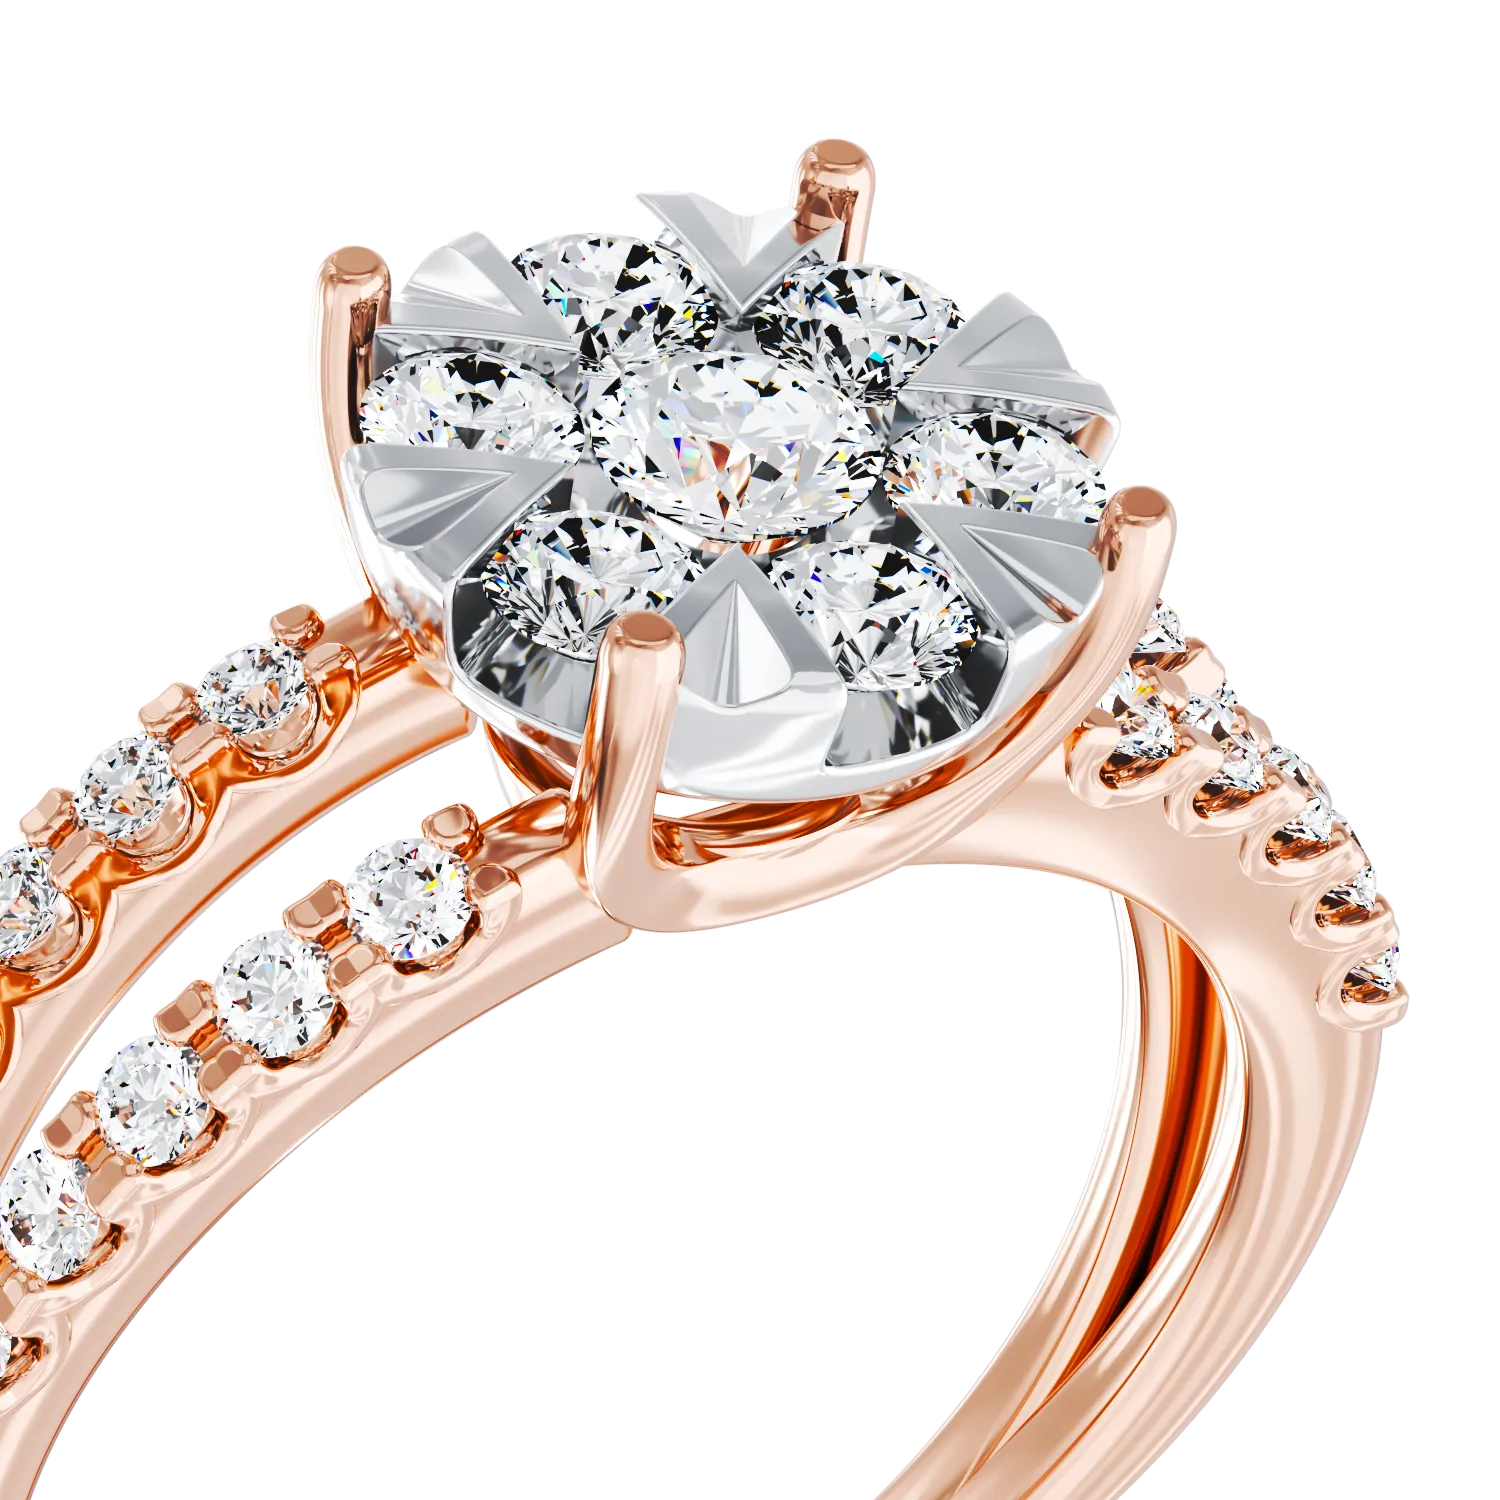 18K rose gold engagement ring with 1ct diamonds